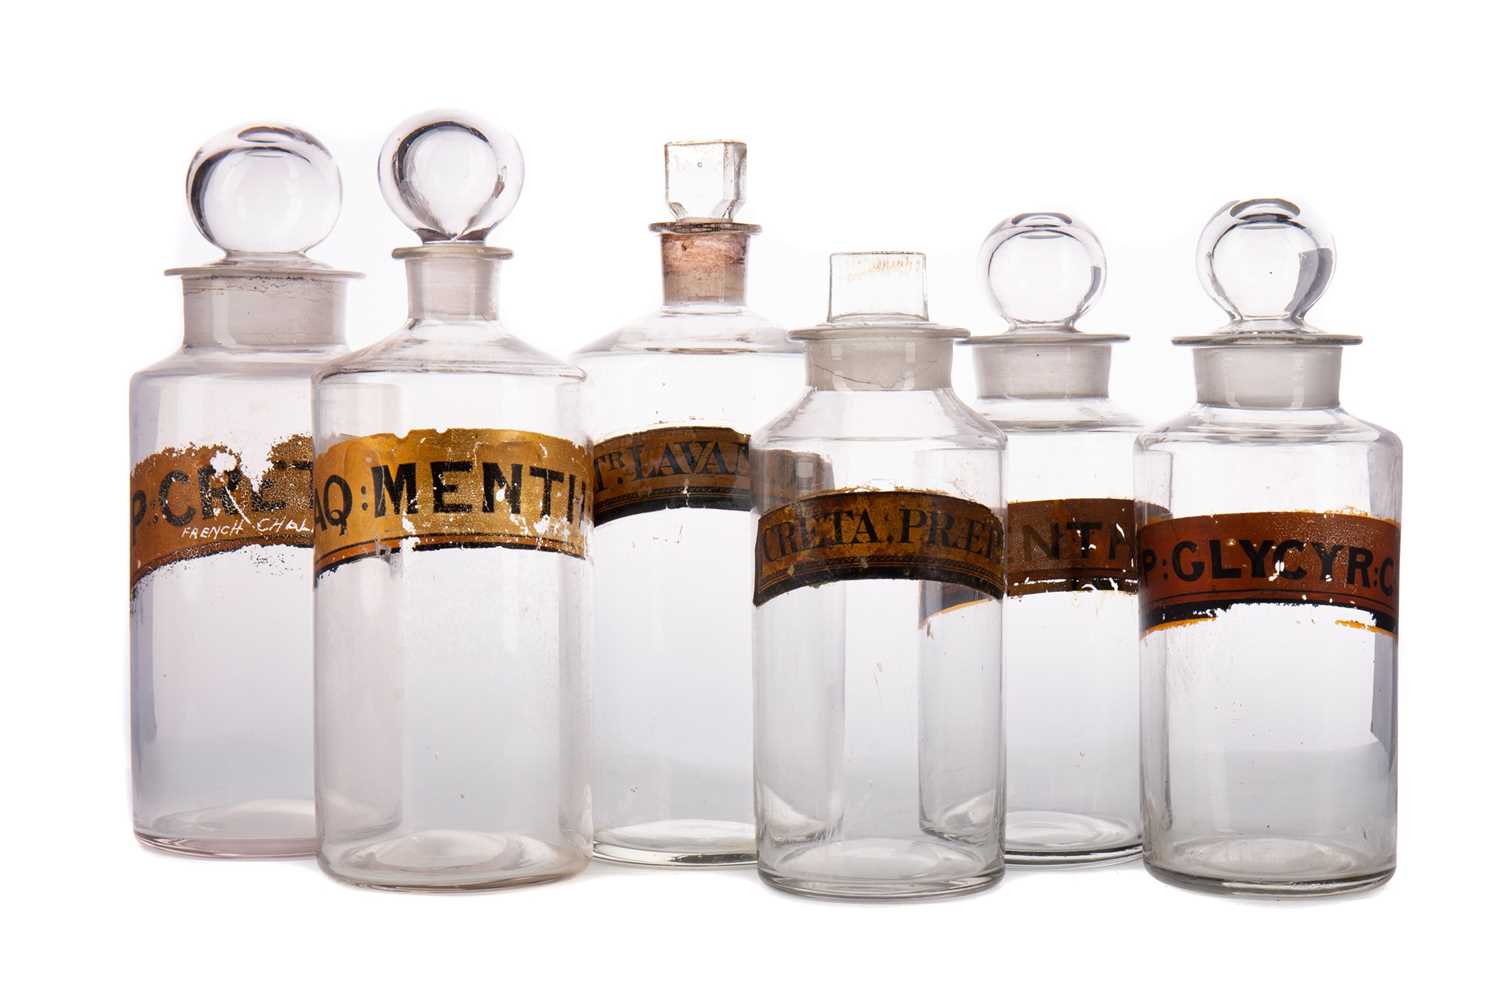 Lot 1142 - FIFTEEN LATE 19TH CENTURY / EARLY 20TH CENTURY PHARMACEUTICAL BOTTLES